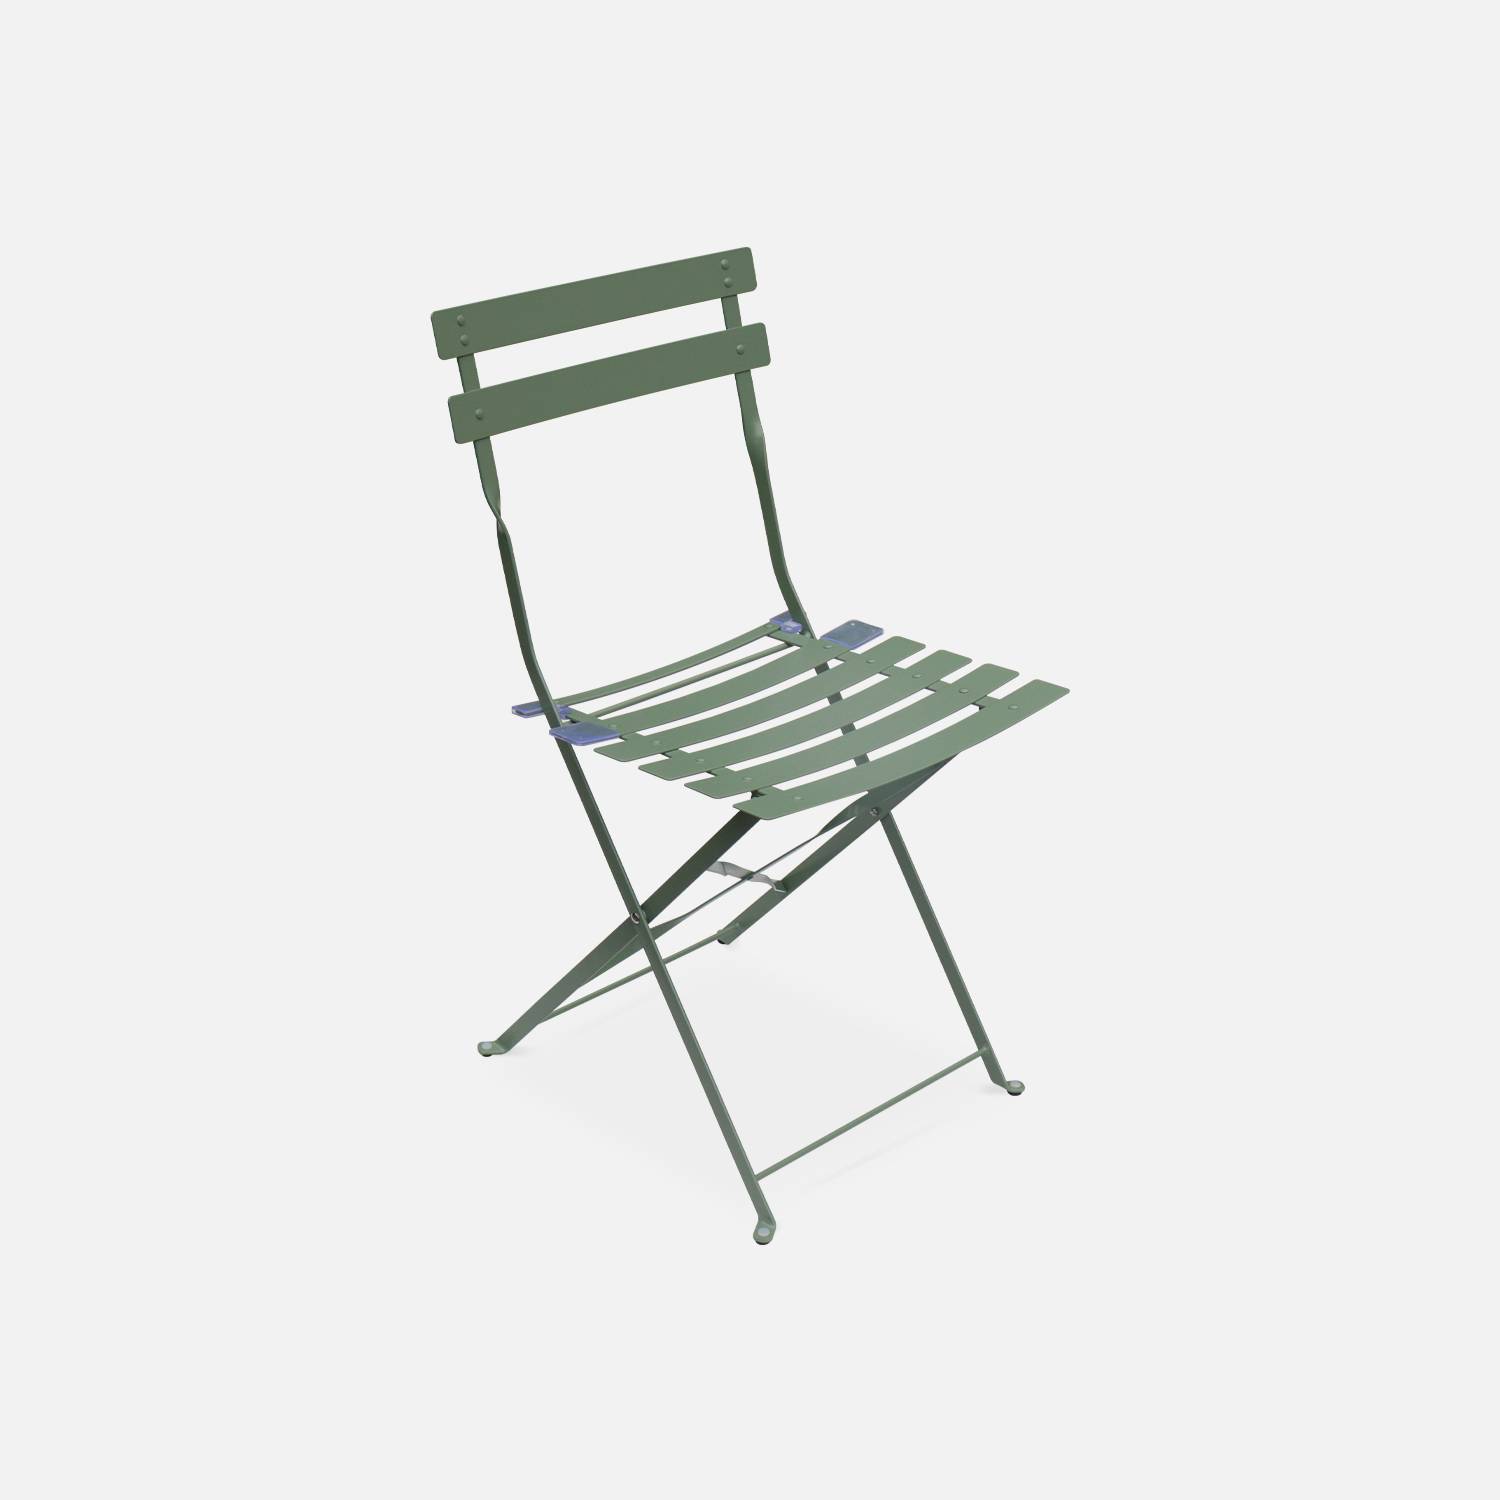 2-seater foldable thermo-lacquered steel bistro garden table with chairs, 70x70cm - Emilia - Sage geen Photo4